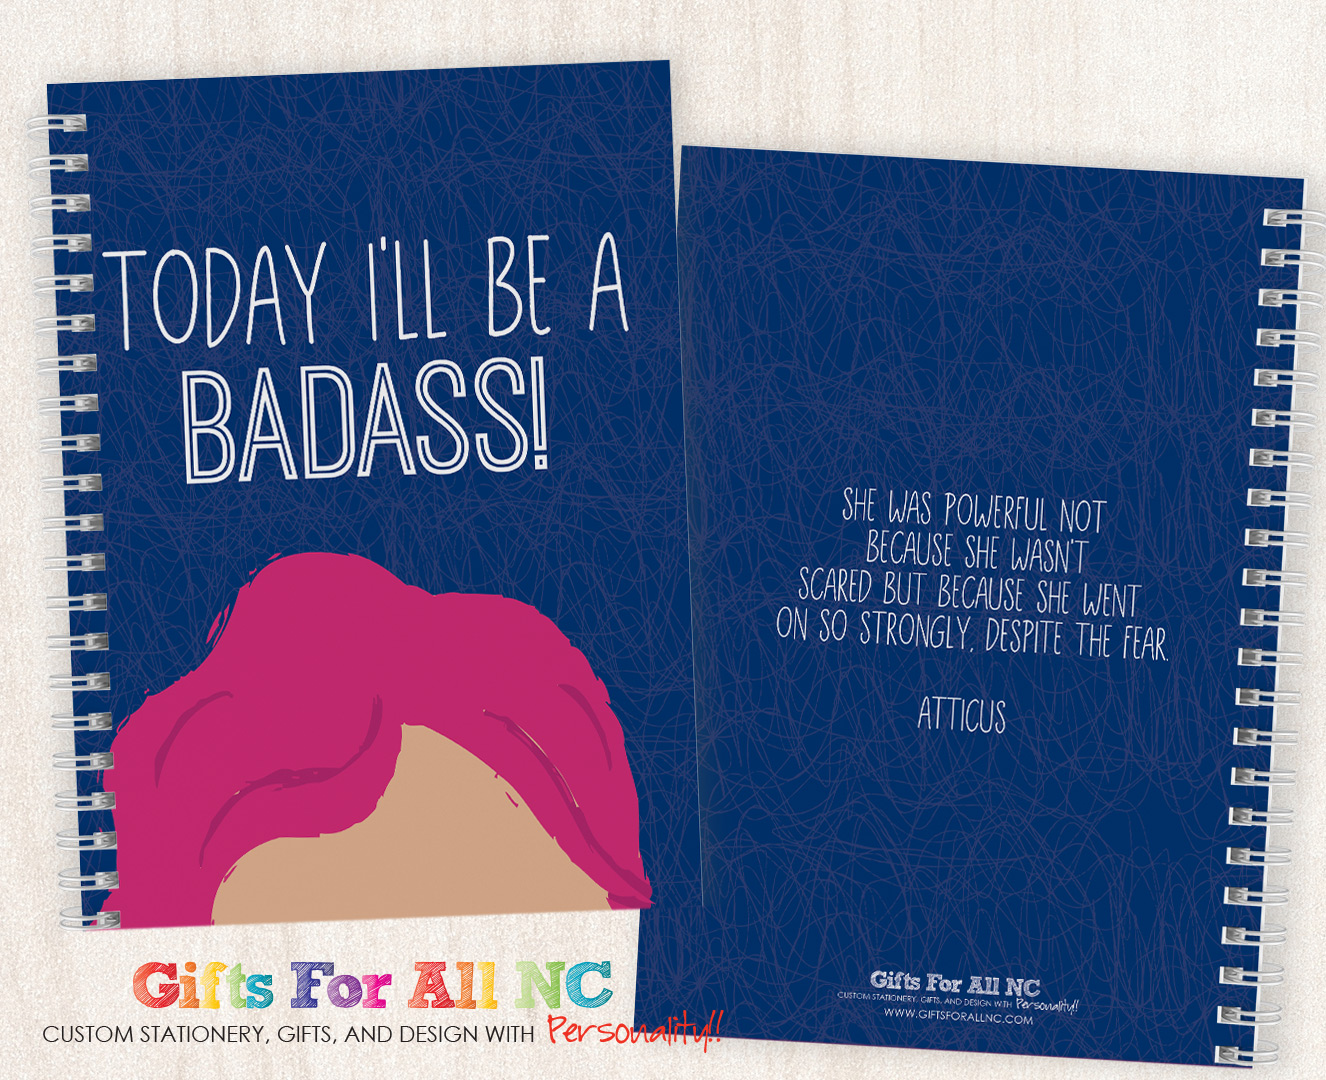 I'll be a BADASS! Personalized Journal